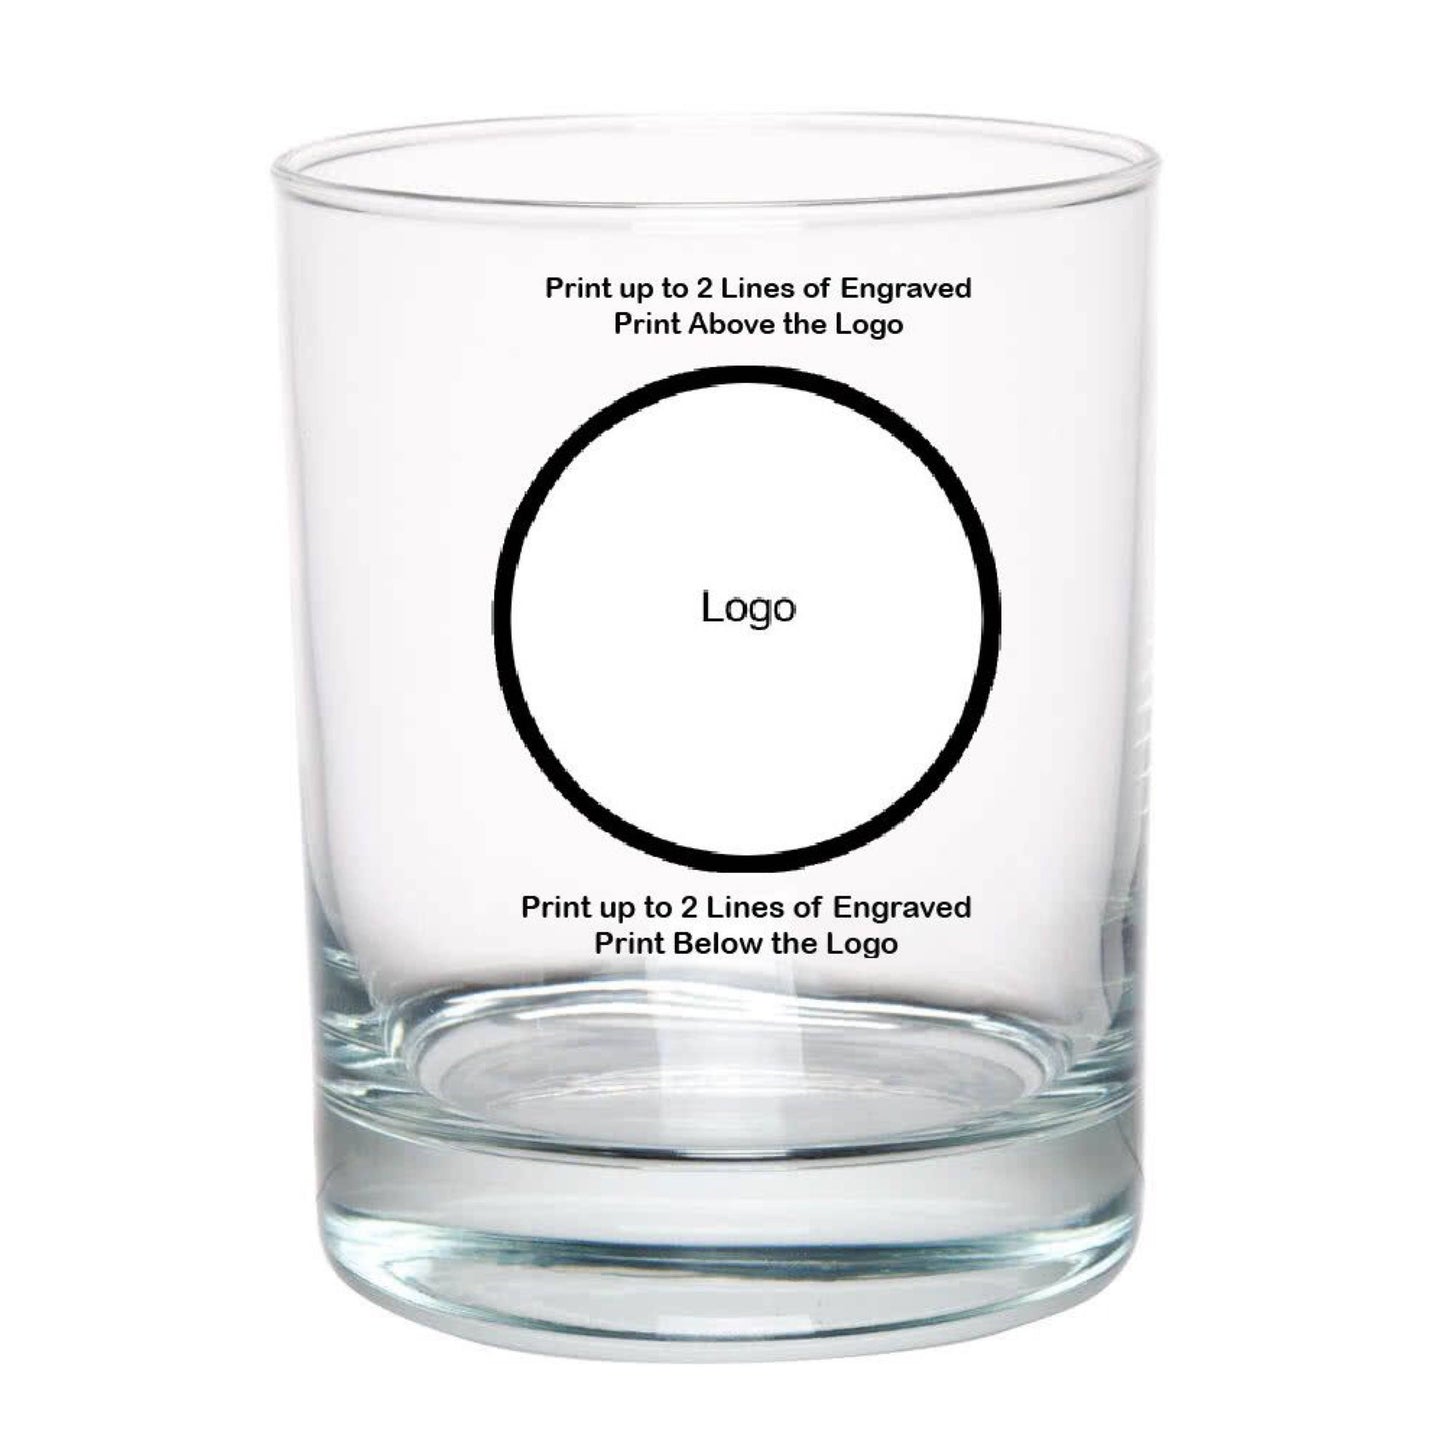 IAFF Officially Licensed 12 Ounce Rocks Glass